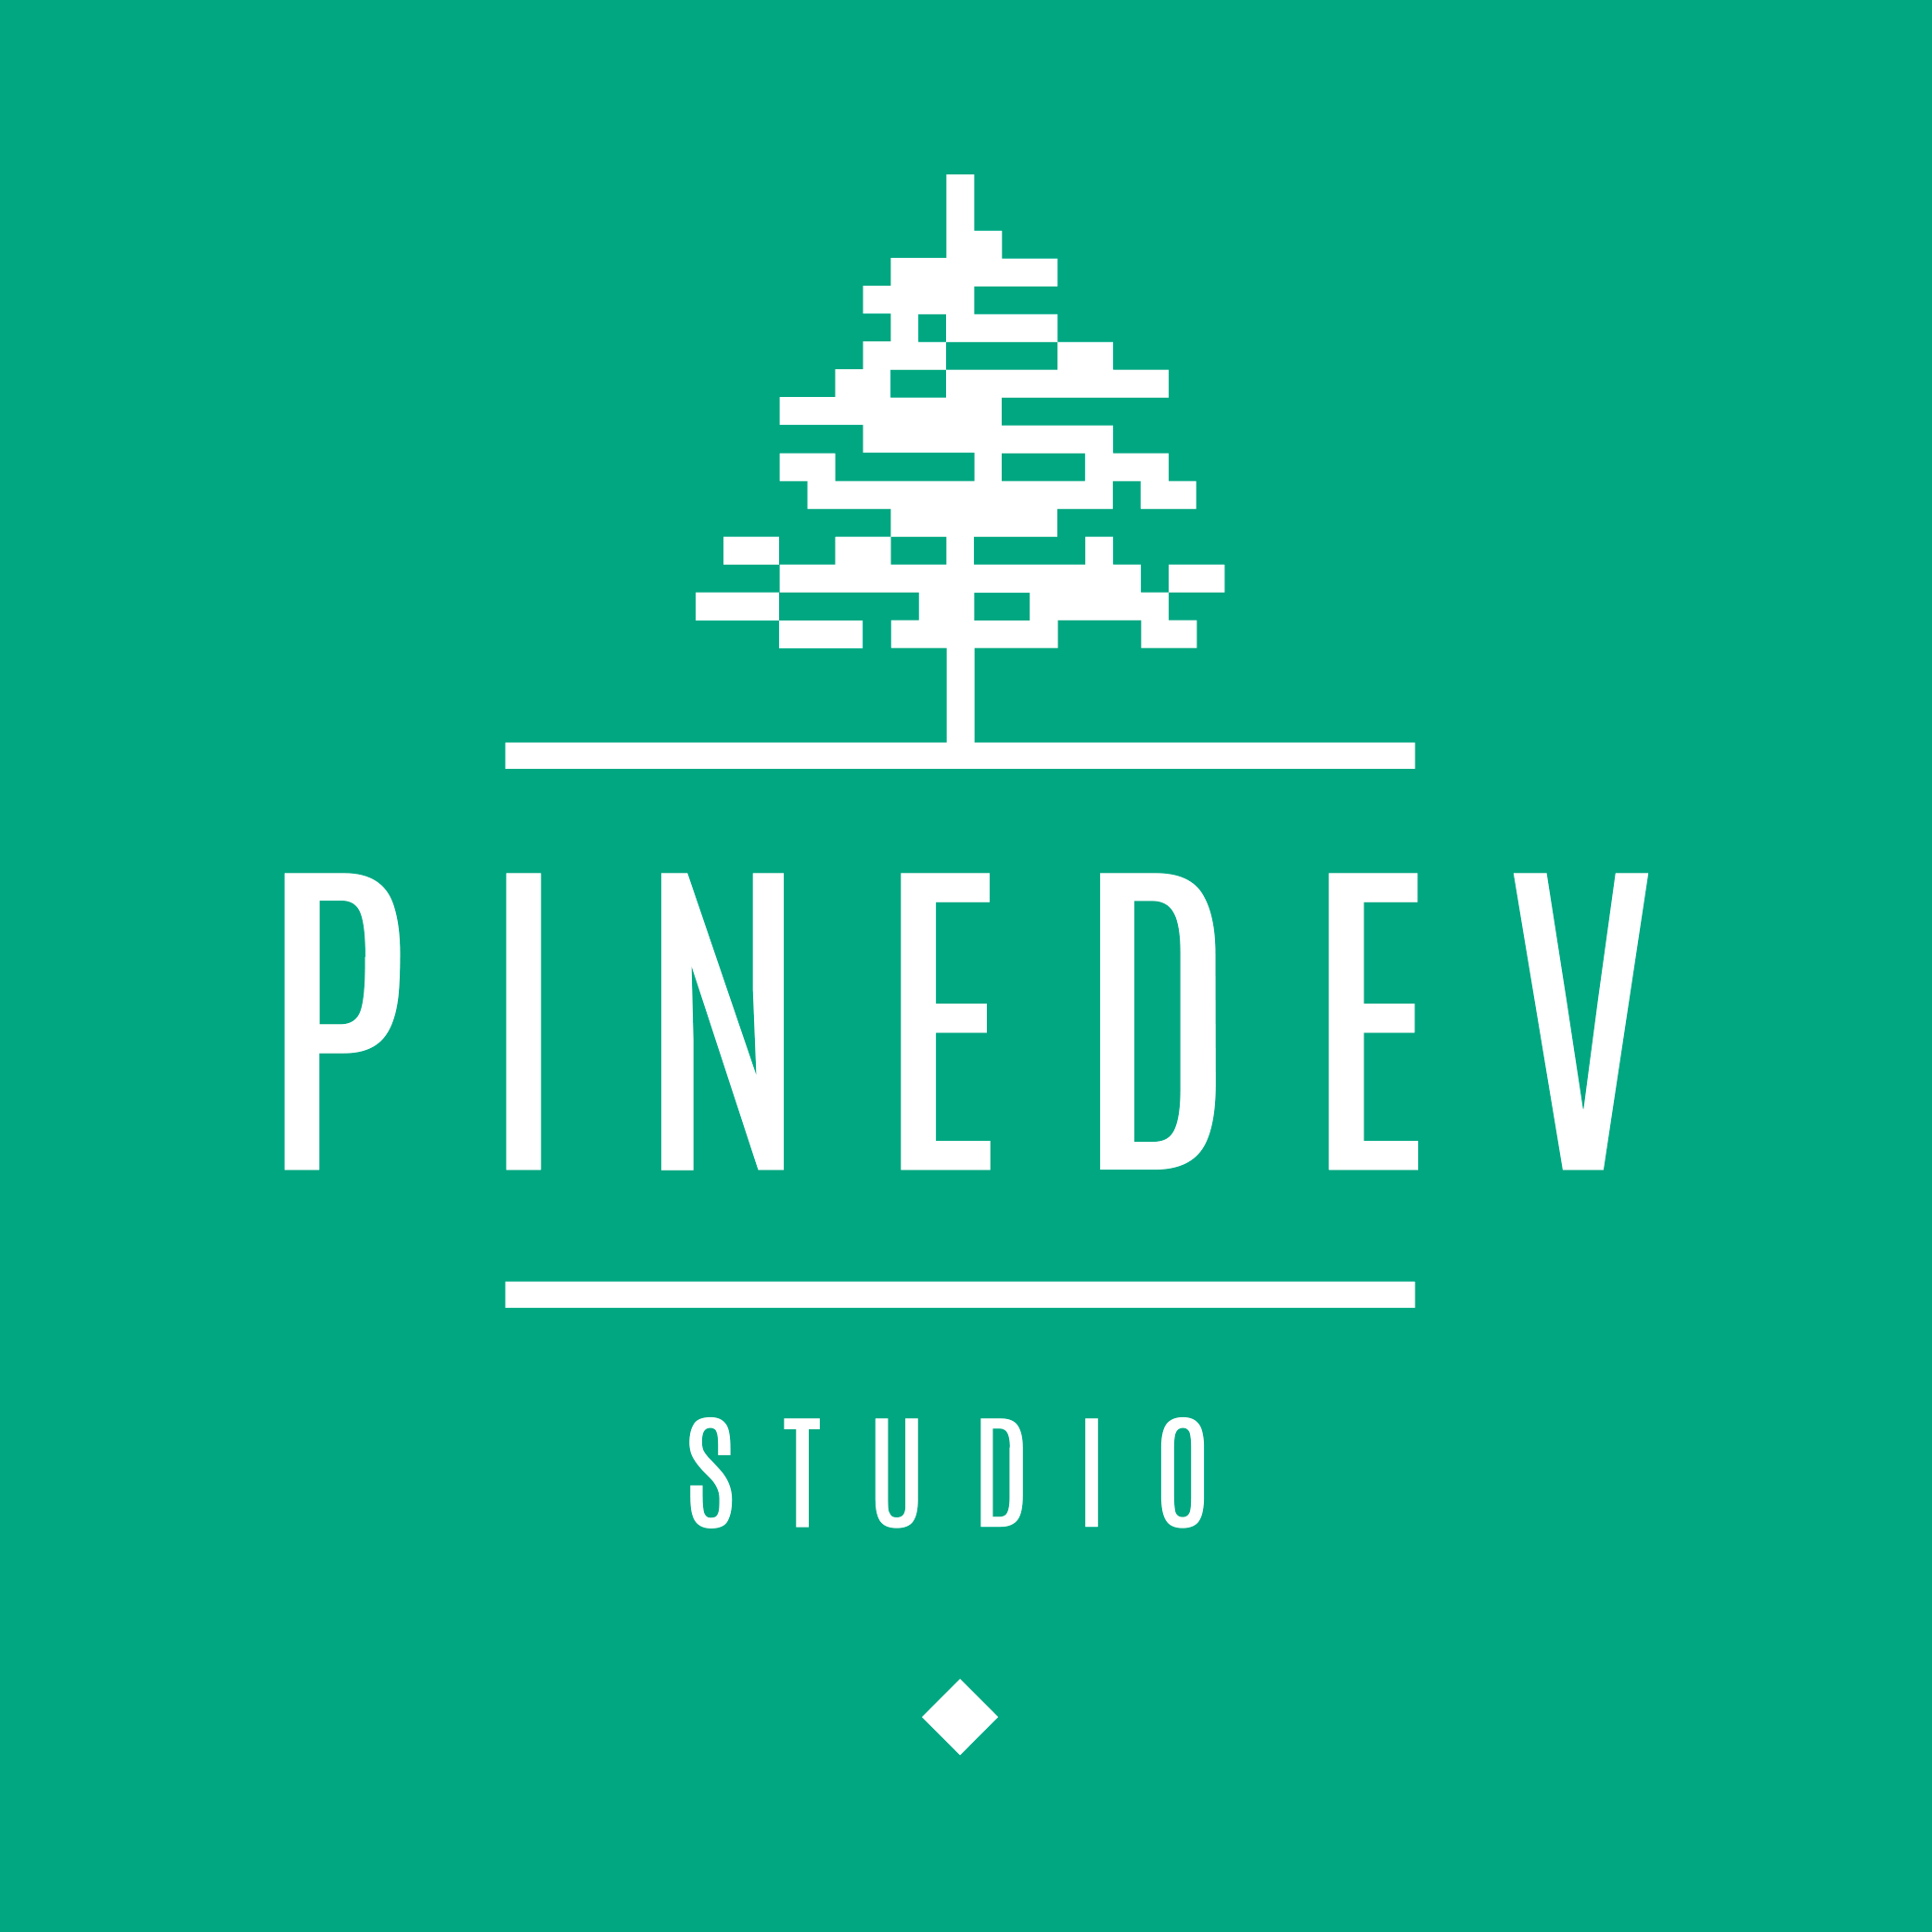 PineDev Studio profile on Qualified.One